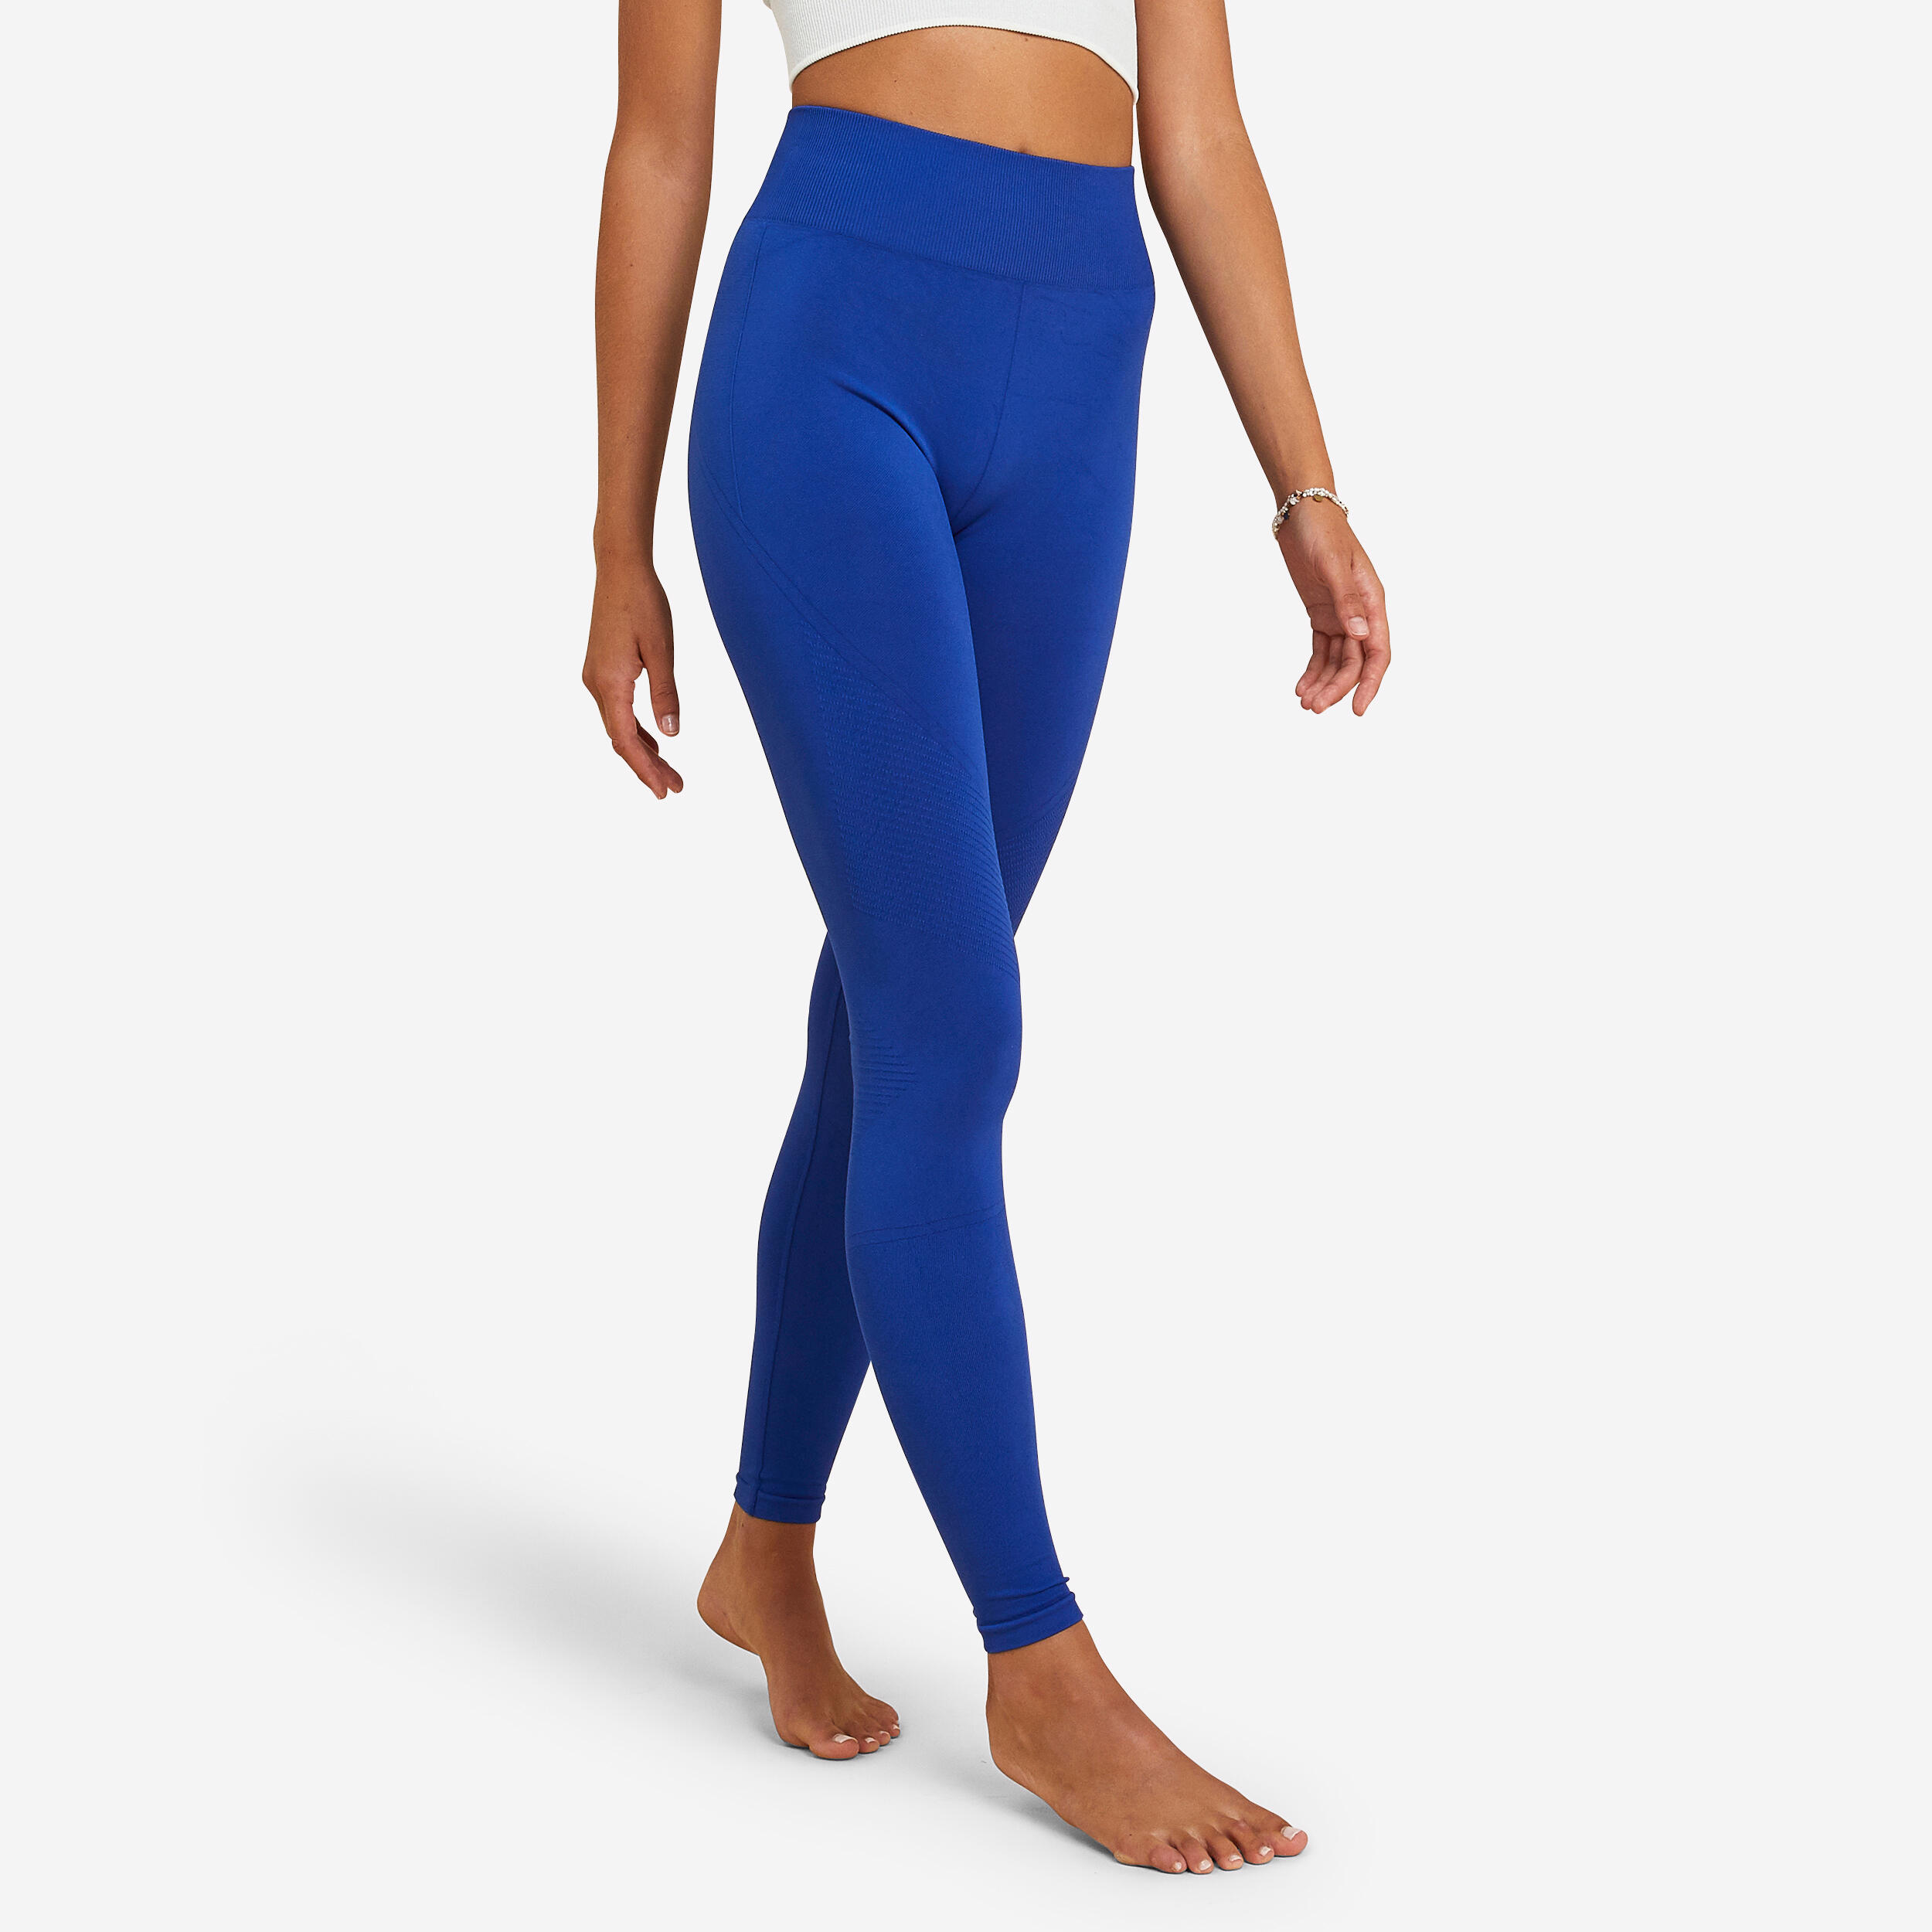 Blue Active Life Reversible Ankle Leggings, Small sz S